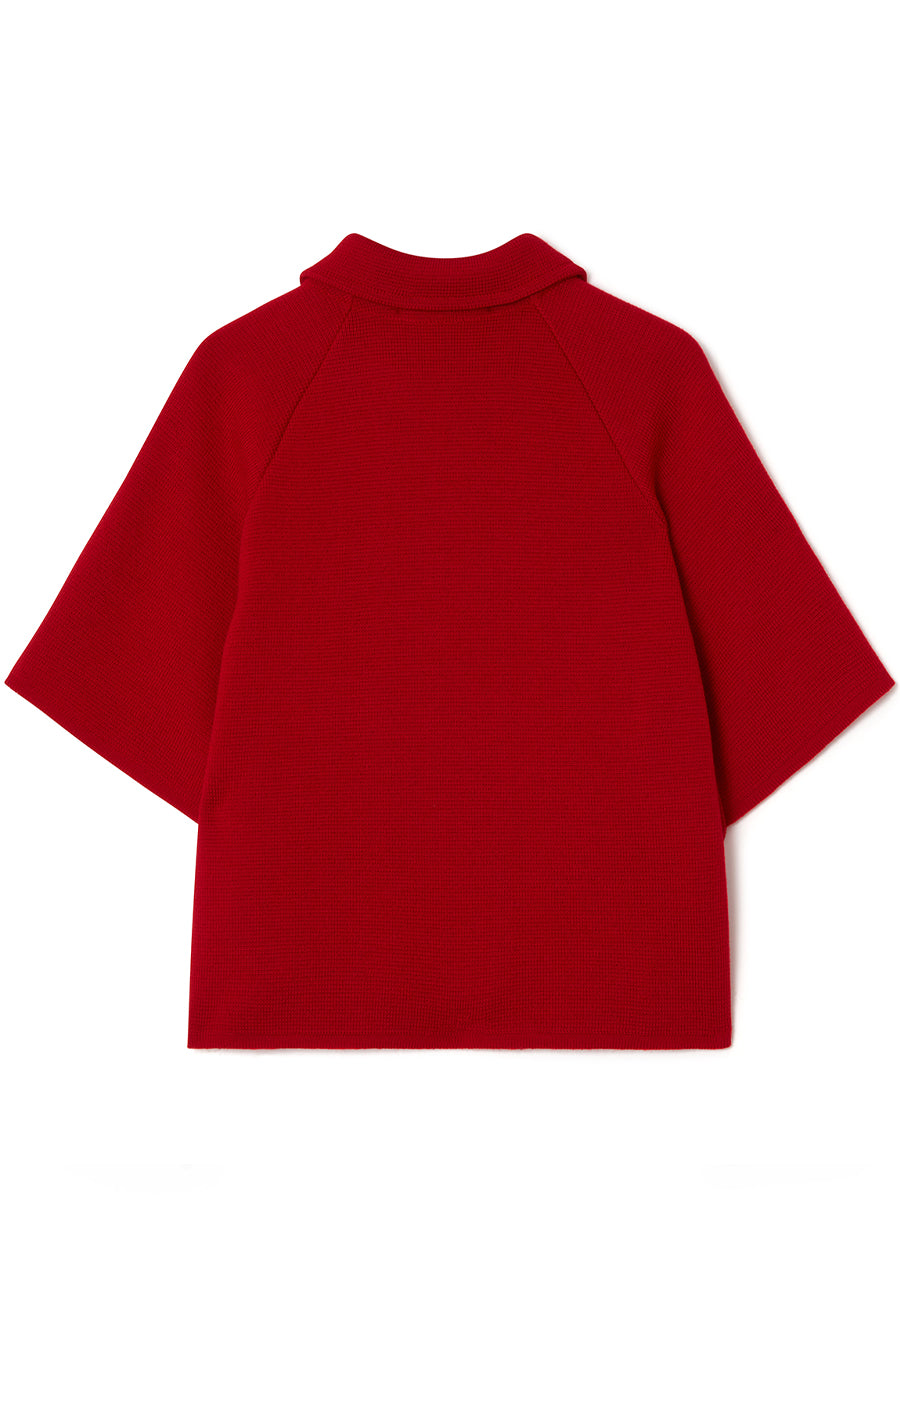 Gertrude Cape Red